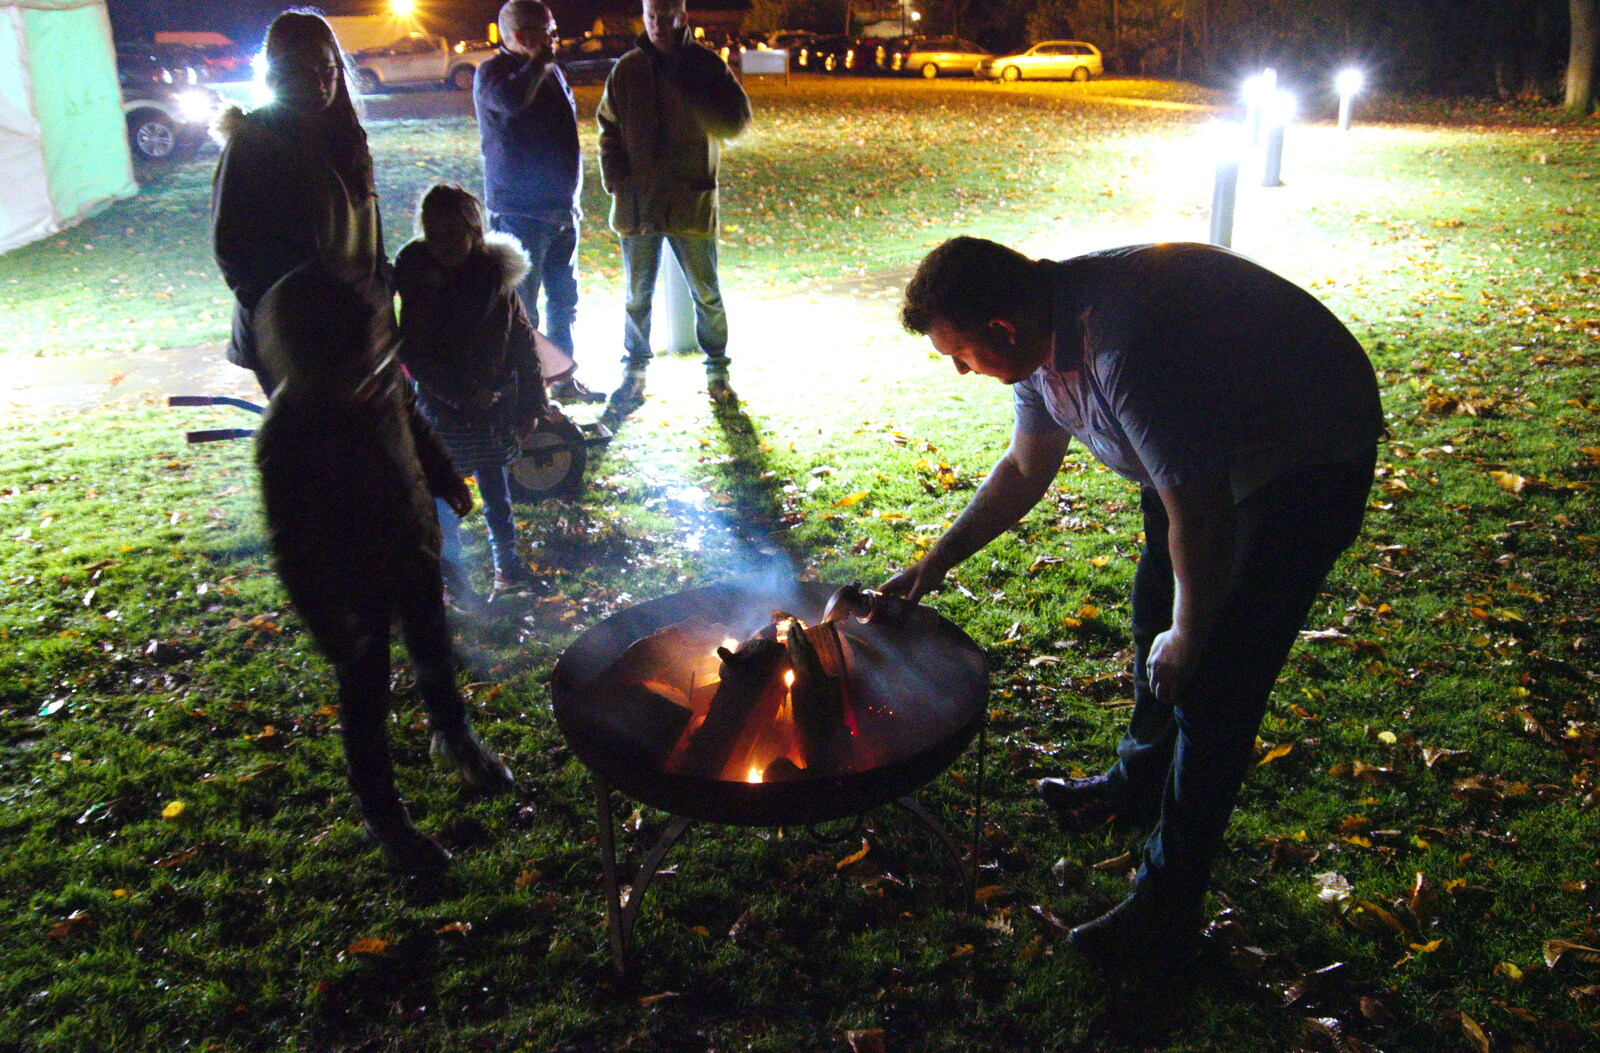 Carl gets some fire pits going with a blowtorch from Day of the Dead Party at the Oaksmere, Brome, Suffolk - 2nd November 2019